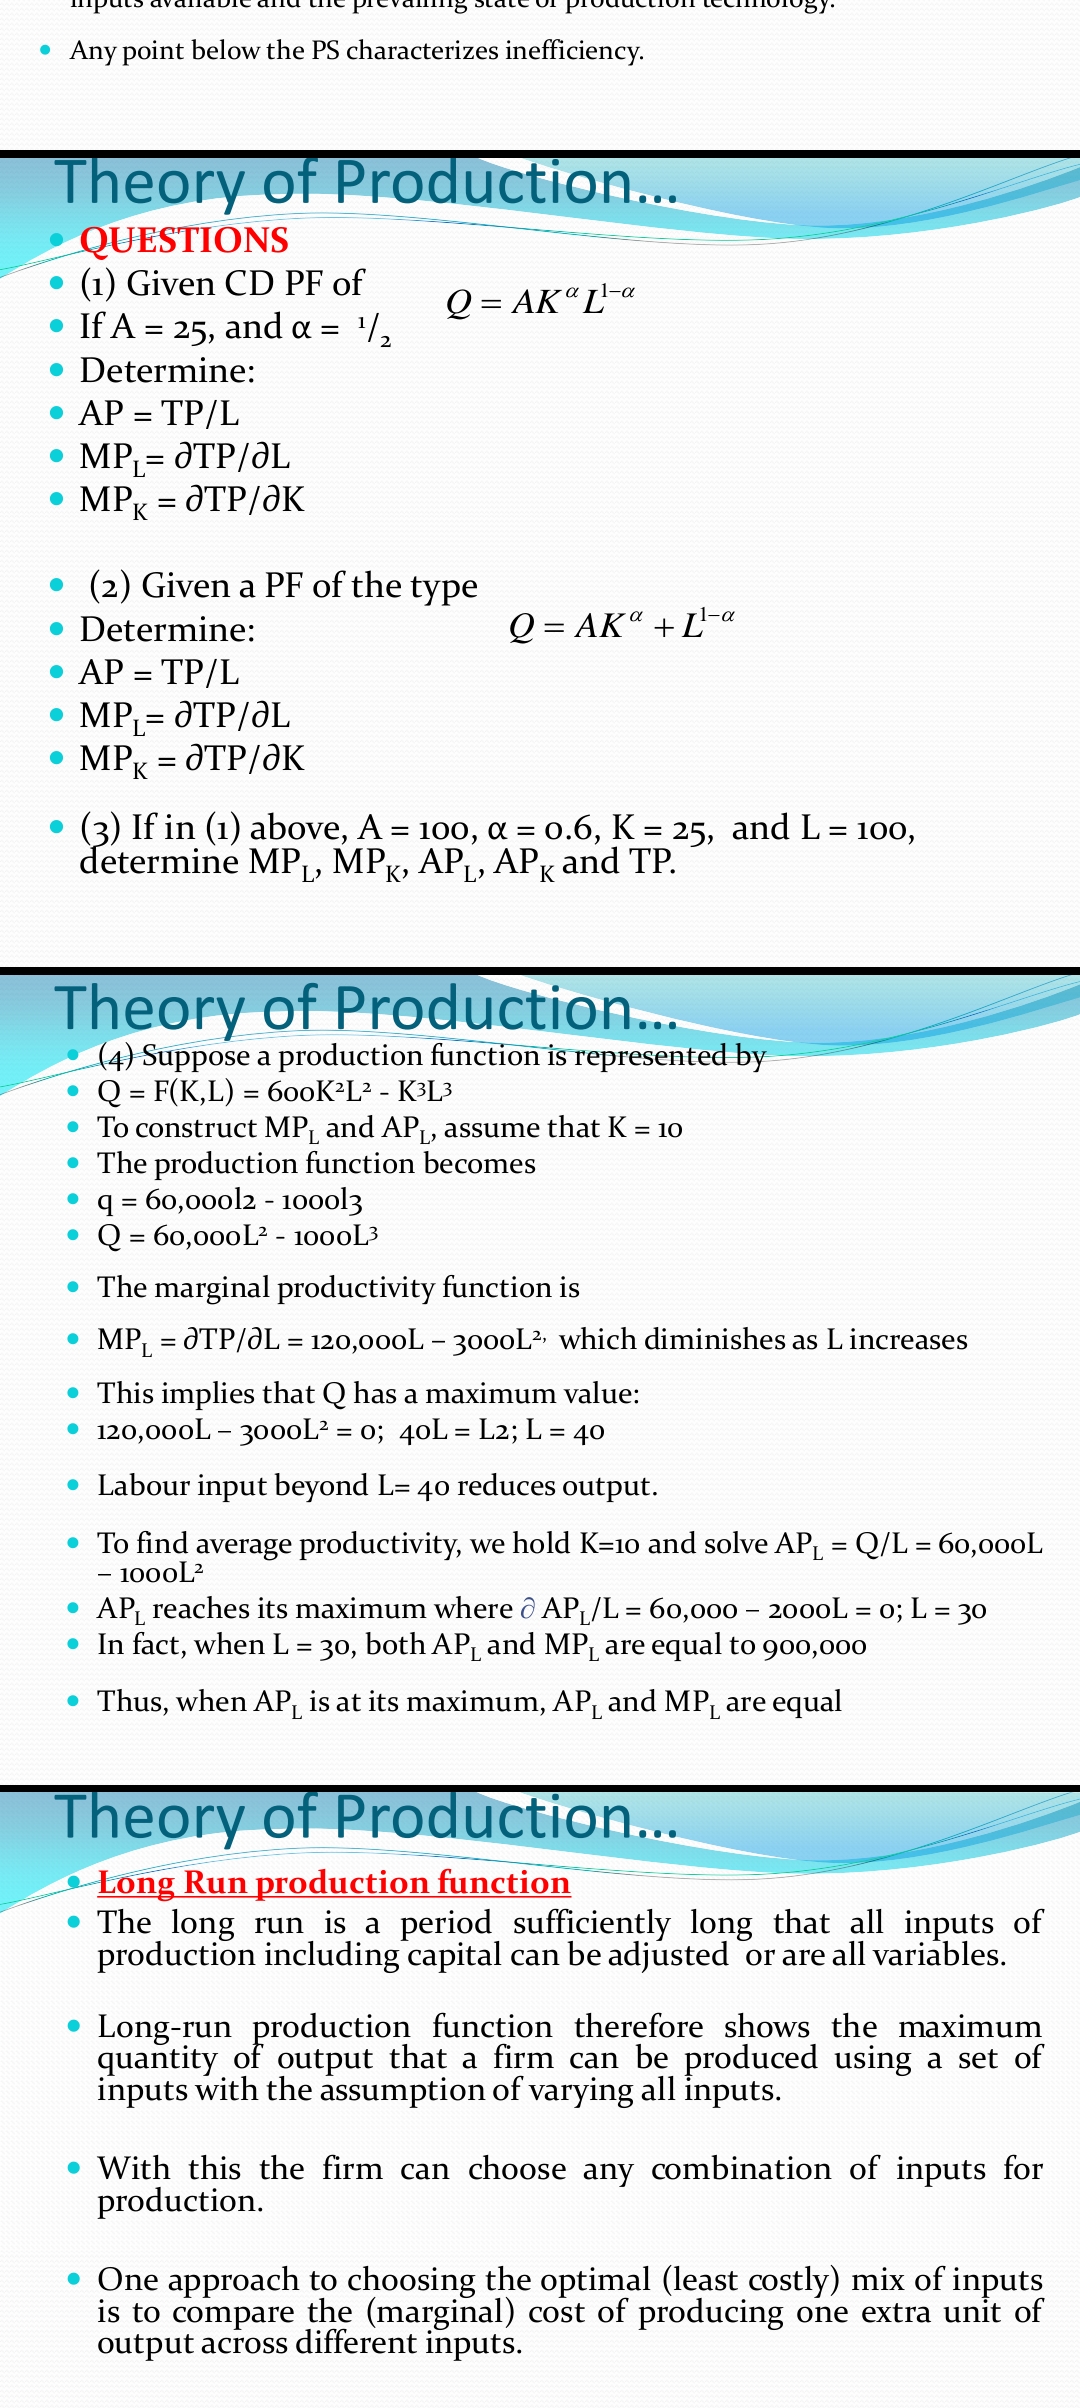 • Any point below the PS characterizes inefficiency.
Theory of Production...
QUESTIONS
(1) Given CD PF of
• If A = 25, and a = /,
Q = AK" L'-a
Determine:
AP = TP/L
MP,= dTP/ƏL
MPK = dTP/ƏK
(2) Given a PF of the type
1-a
Determine:
Q = AK" + L"
• AP = TP/L
• MP,= dTP/ƏL
MPK = dTP/ƏK
%3D
(3) If in (1) above, A = 100, a = 0.6, K = 25, and L= 100,
determine MPL, MPK, AP, APK and TP.
%3D
Theory of Production..
(4) Suppose a production function is represented by
Q = F(K,L) = 600K²L² - K3L3
• To construct MP, and AP, assume that K = 10
• The production function becomes
q = 60,000l2 - 10ool3
Q = 60,000L? - 1000L3
The marginal productivity function is
MPL = dTP/dL = 120,000L - 30ooL? which diminishes as L increases
• This implies that Q has a maximum value:
• 120,000L - 30ooL? = 0; 40L = L2; L = 40
• Labour input beyond L= 4o reduces output.
• To find average productivity, we hold K=10 and solve AP, = Q/L = 60,000L
1000L?
• AP, reaches its maximum where ô APL/L = 60,000 - 2000L = 0; L = 30
• In fact, when L = 30, both APL and MPL are equal to 900,000
%3D
• Thus, when AP_ is at its maximum, AP, and MP are equal
Theory of Production...
Long Run production function
• The long run is a period sufficiently long that all inputs of
production including capital can be adjusted or are all variables.
Long-run production function therefore shows the maximum
quantity of output that a firm can be produced using a set of
inputs with the assumption of varying all inputs.
• With this the firm can choose any combination of inputs for
production.
• One approach to choosing the optimal (least costly) mix of inputs
is to compare the (marginal) cost of producing one extra unit of
output across different inputs.
